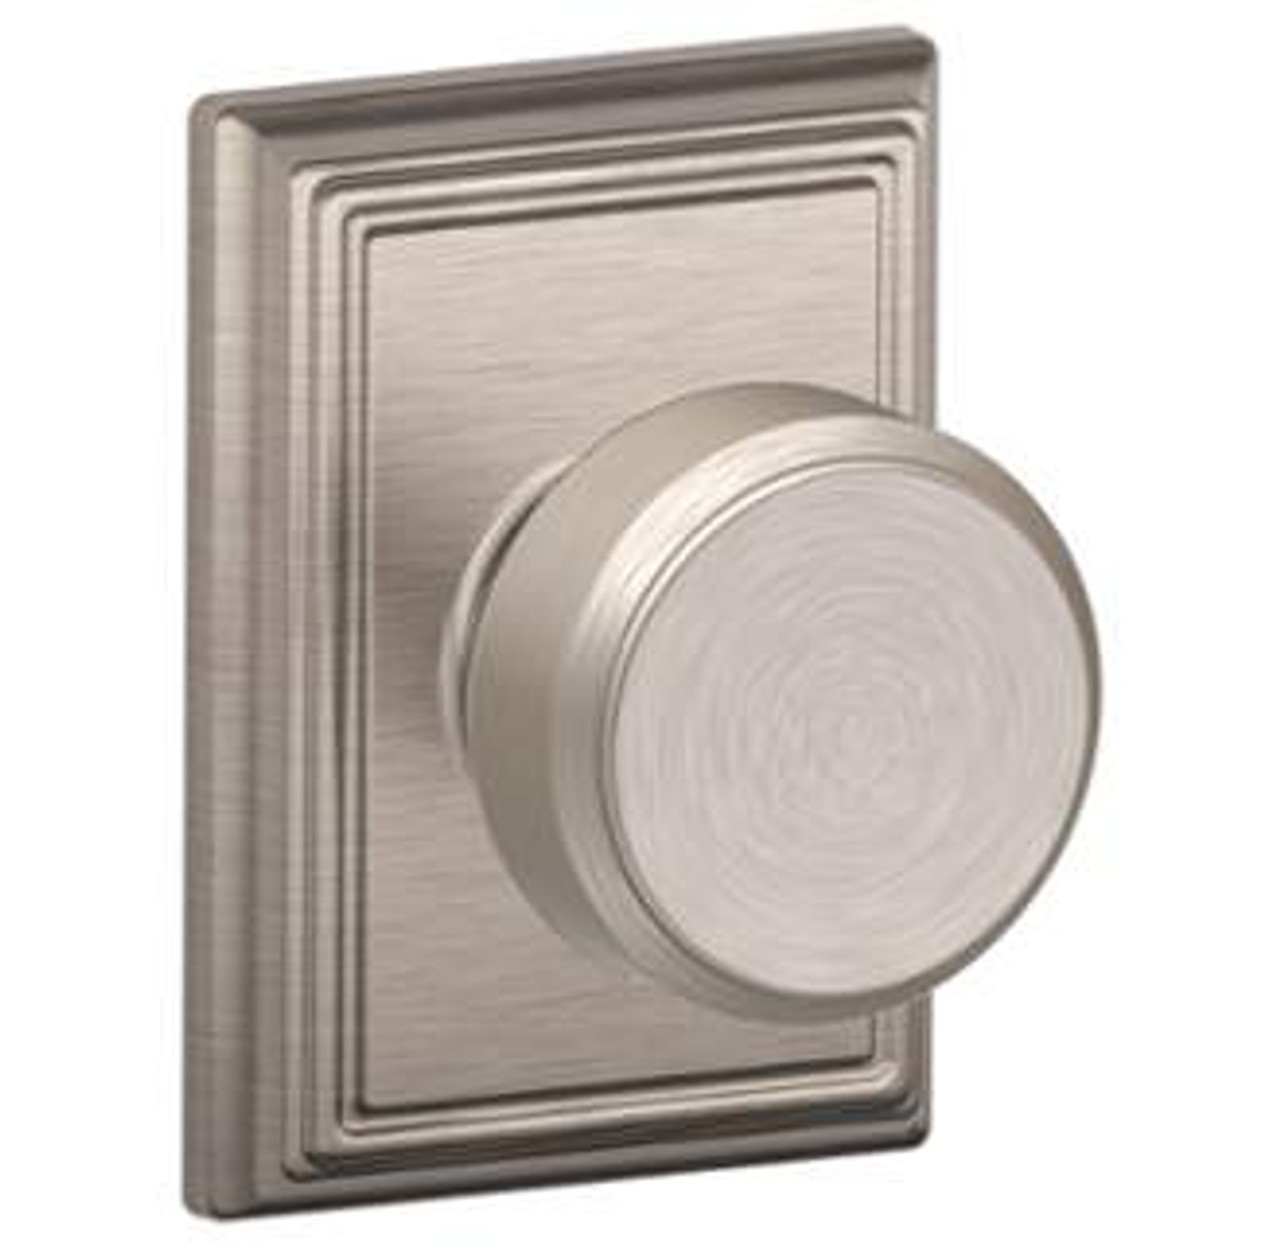 https://cdn11.bigcommerce.com/s-hn76ucwp5f/images/stencil/1280x1280/products/24459/37662/schlage-f10-bwe-619-add-satin-nickel-passage-bowery-style-knob-with-addison-rose-2.gif__94288.1710260612.jpg?c=1